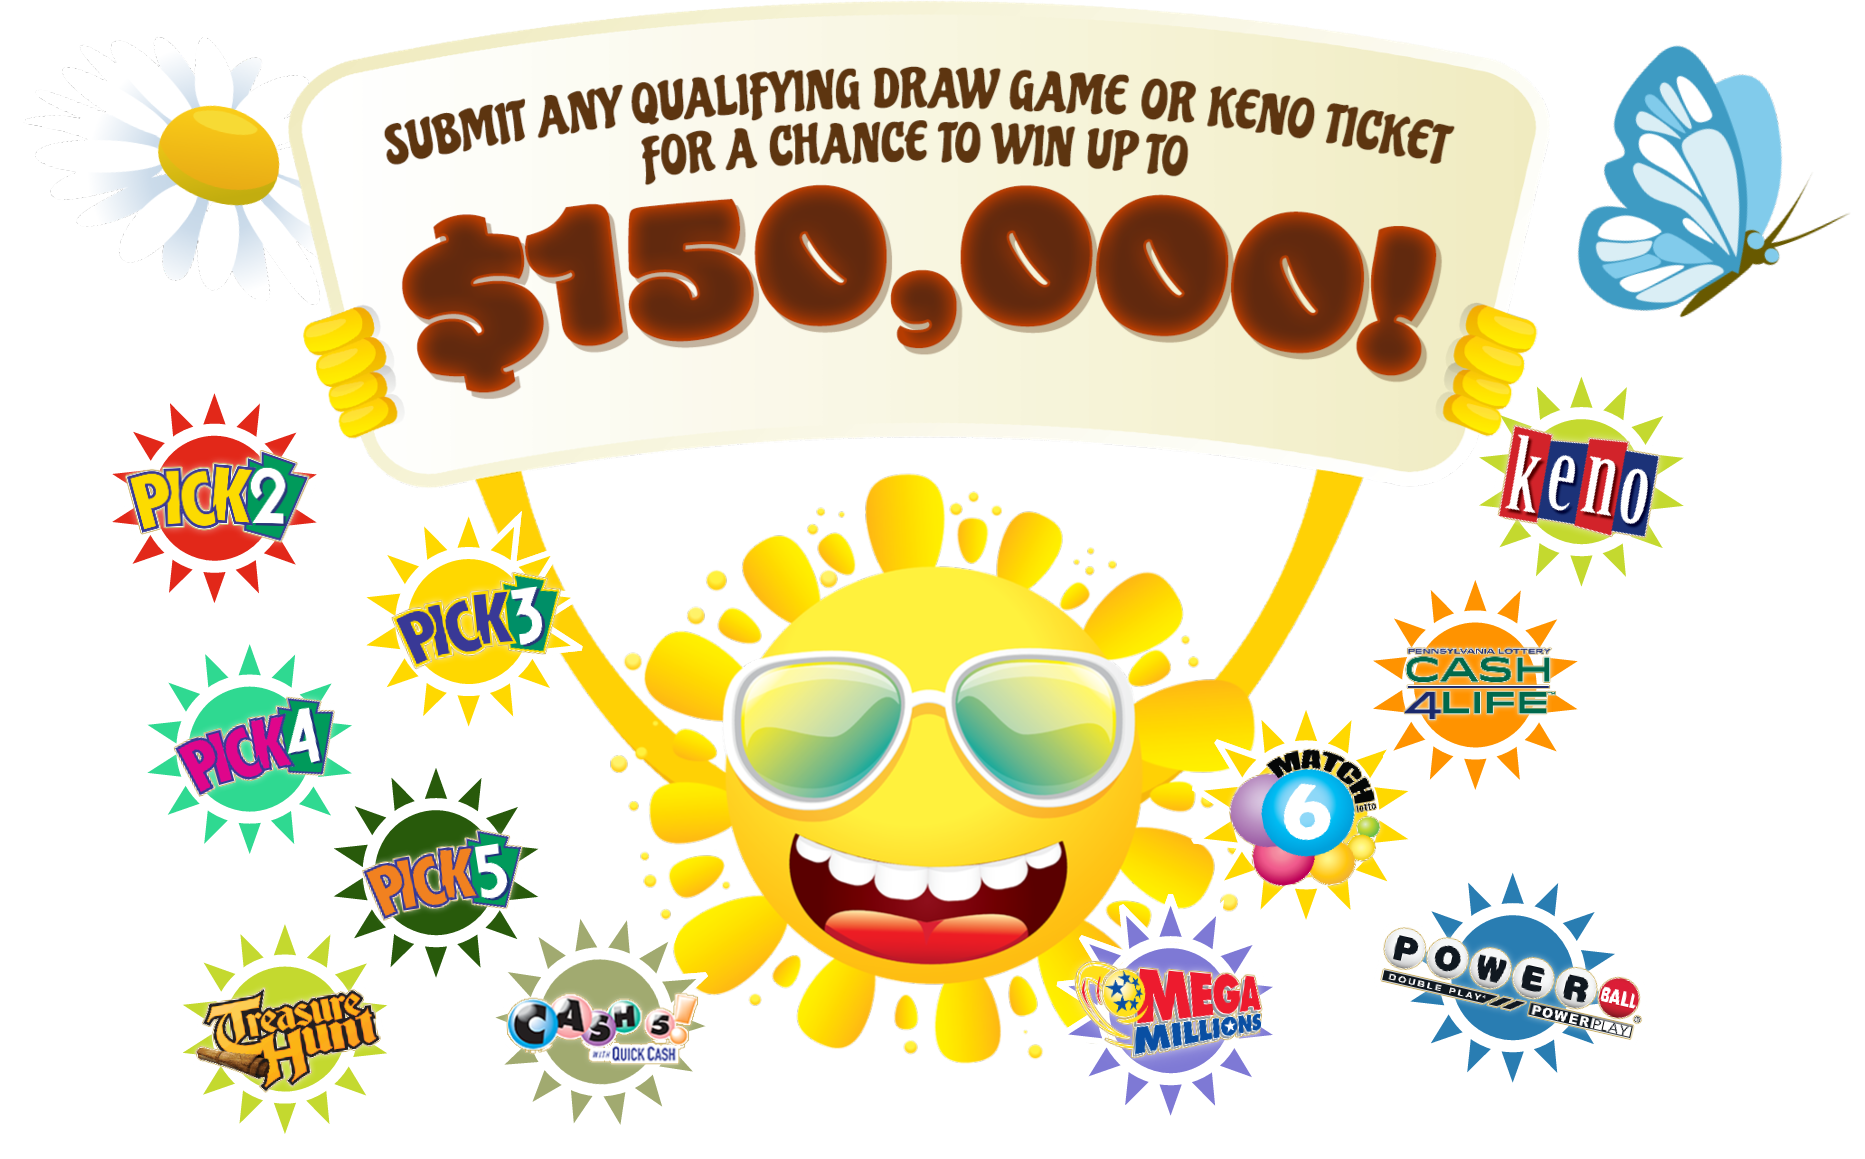 Submit any qualifying Draw Game or Keno ticket for a chance to win up to $150,000